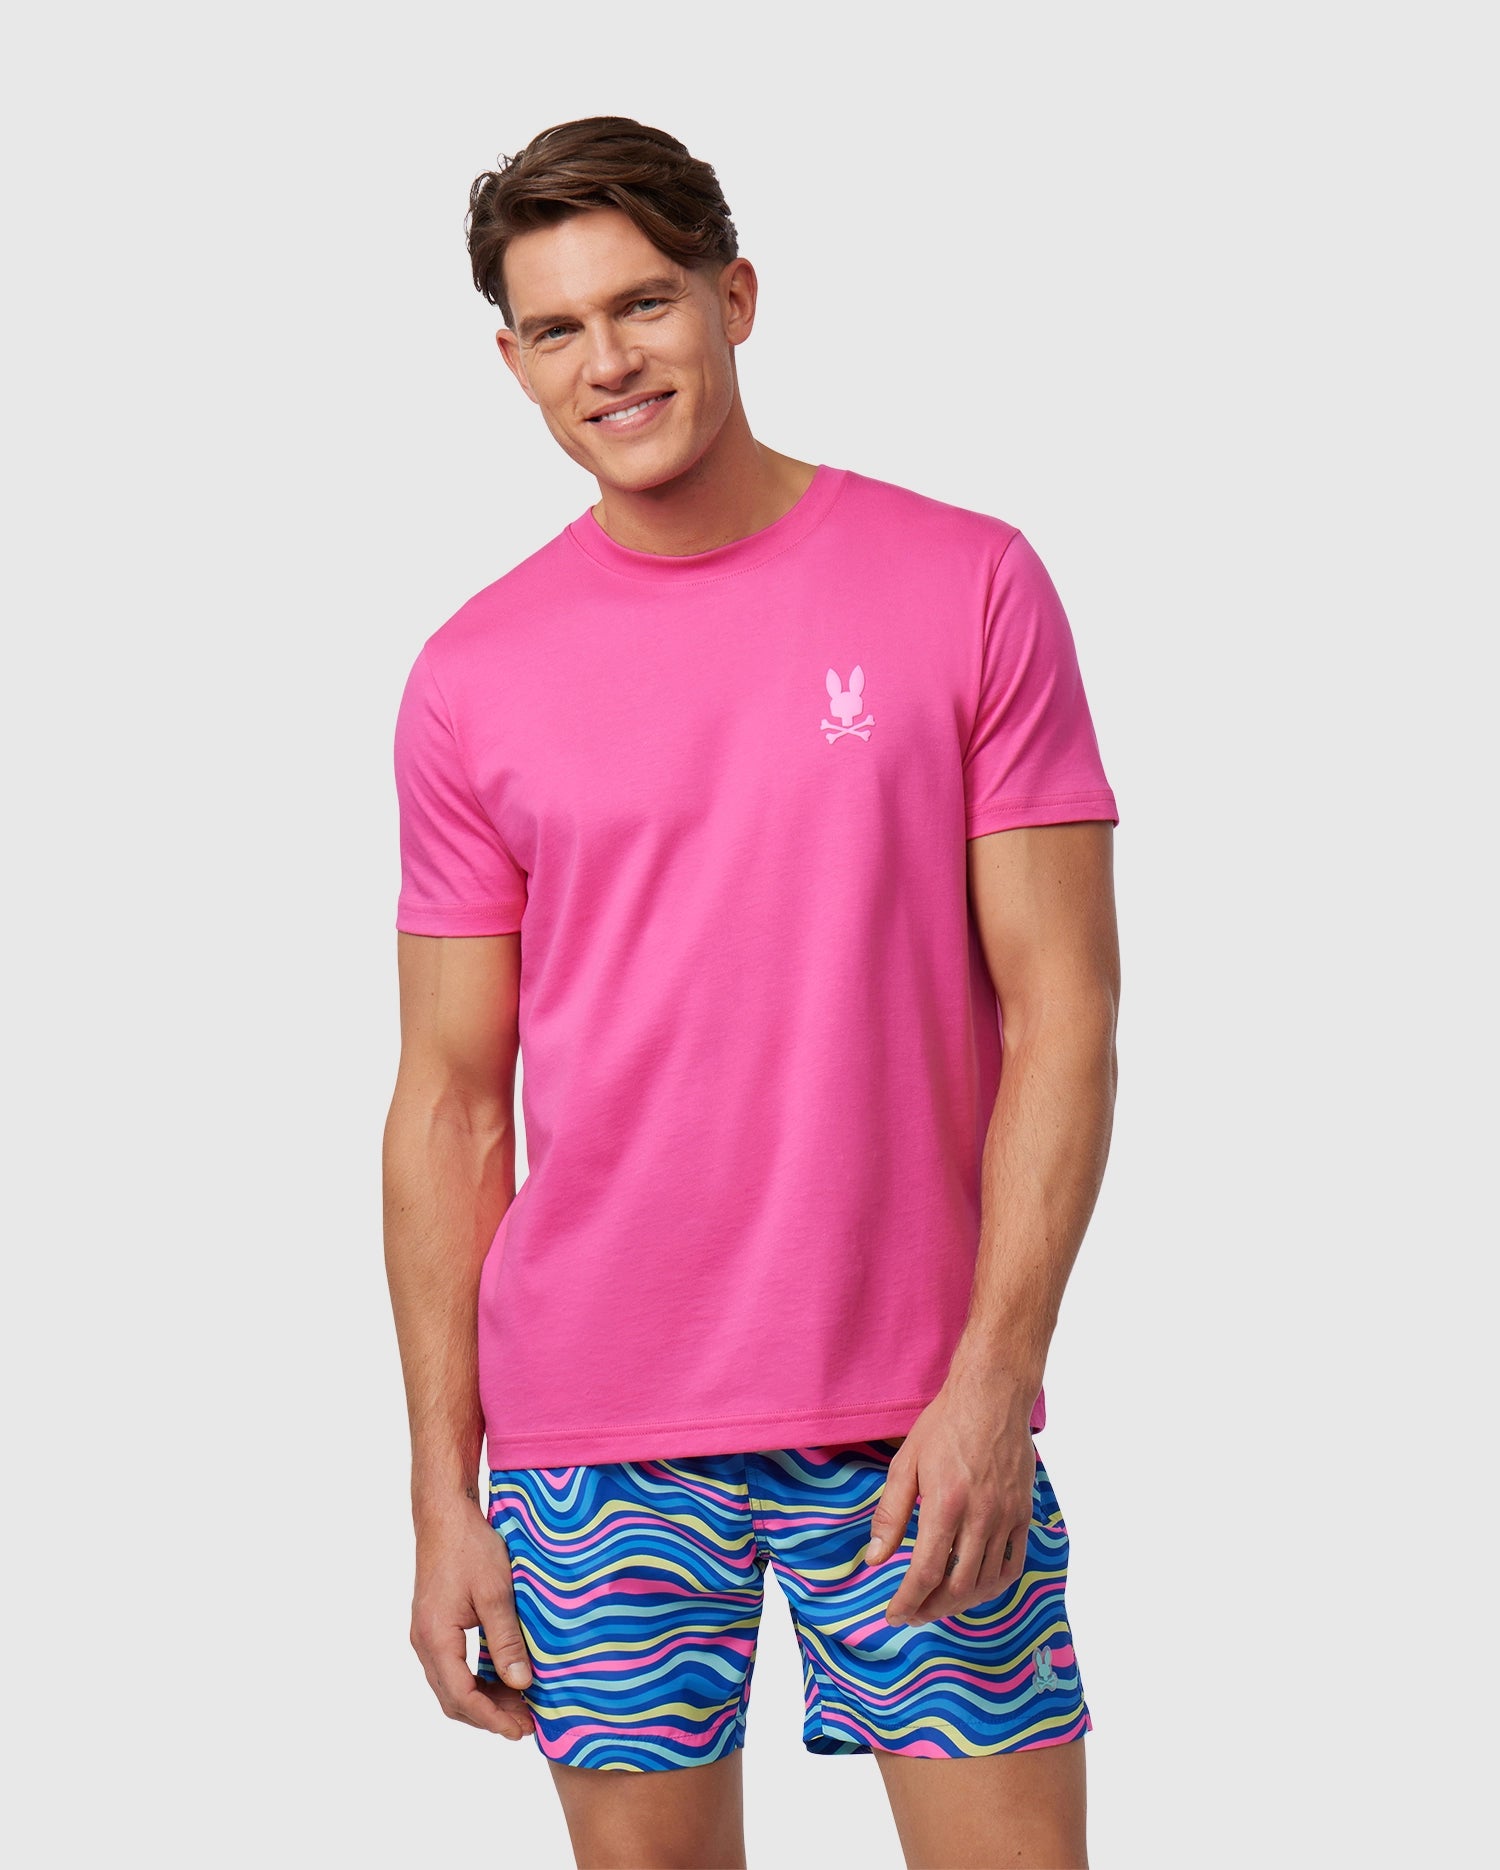 A man smiling, wearing a bright pink Psycho Bunny Pima cotton t-shirt and colorful striped shorts, standing against a plain white background.